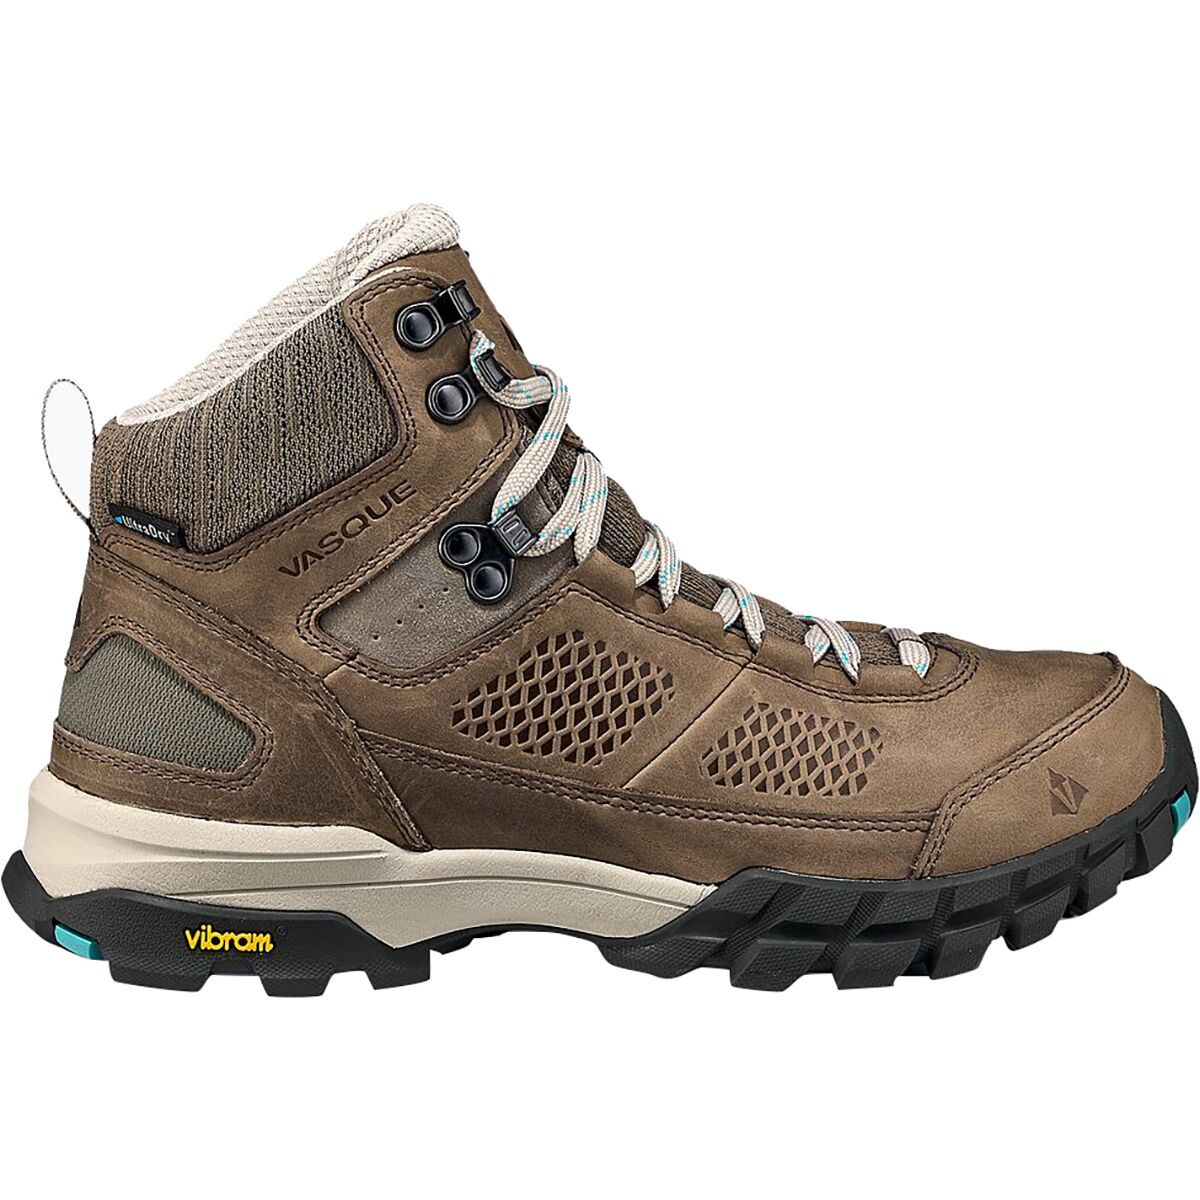 Talus AT UltraDry Wide Hiking Boot - Women